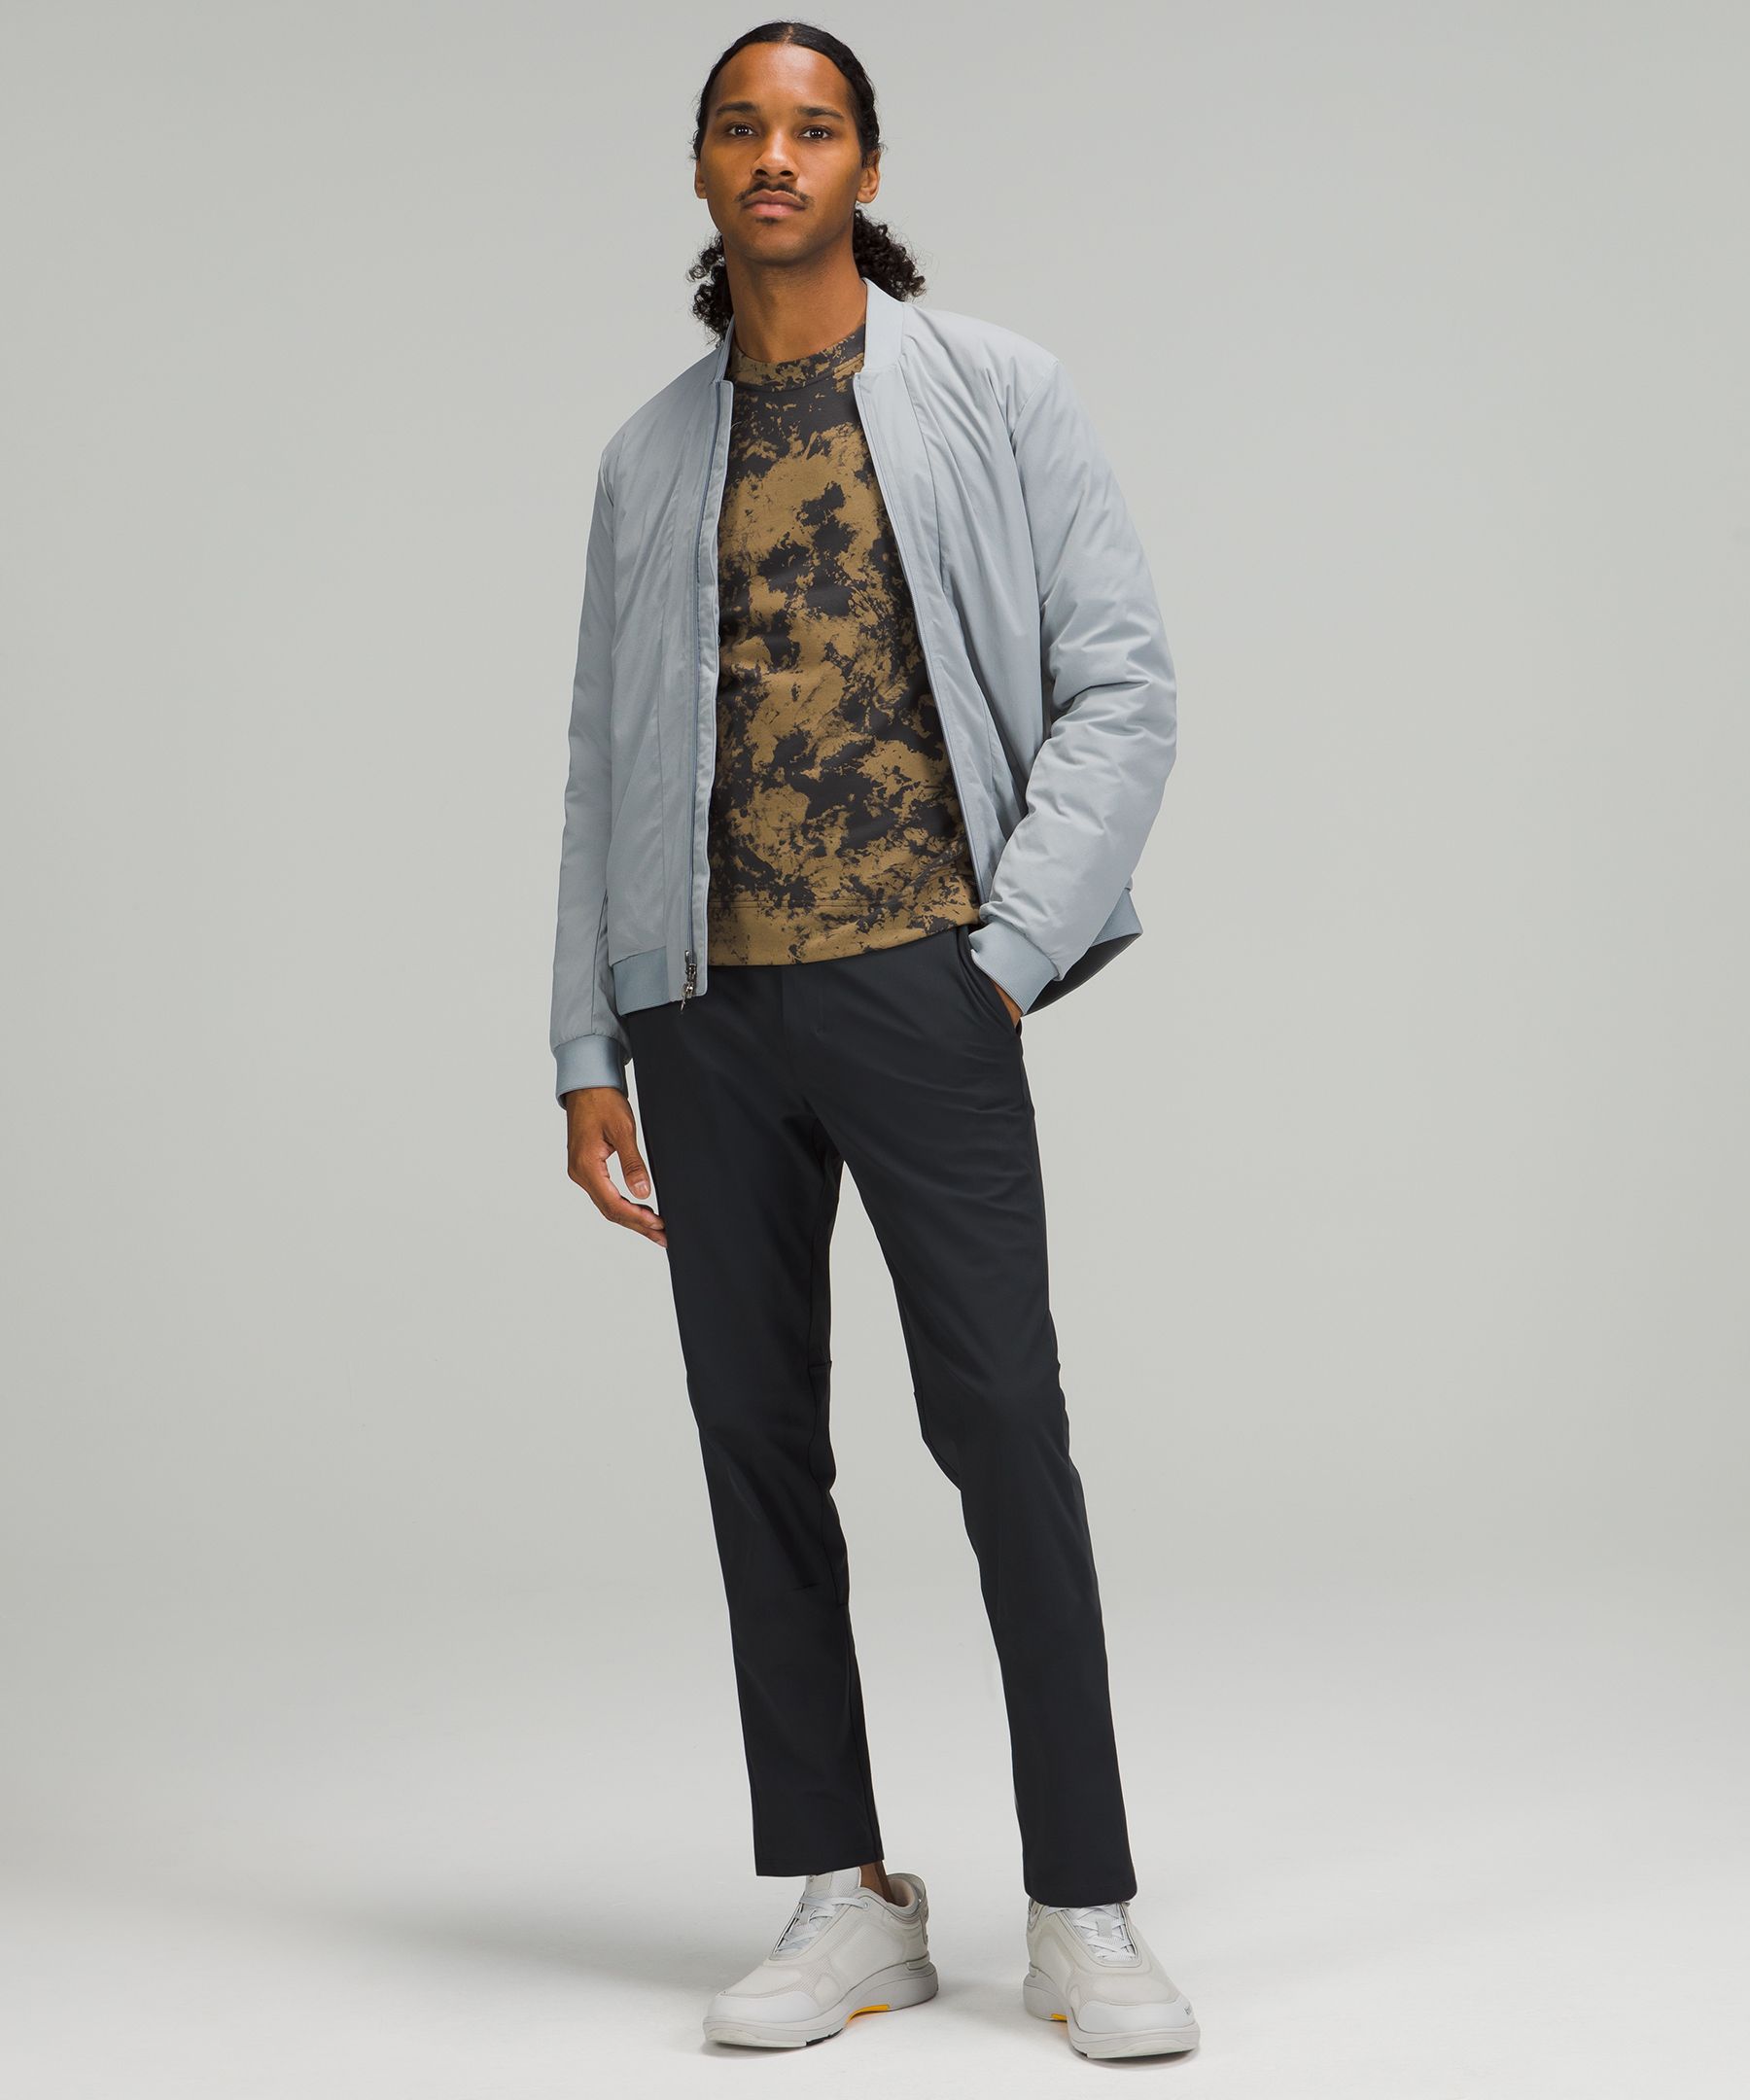 Father's Day Casual Wear Gifts | lululemon